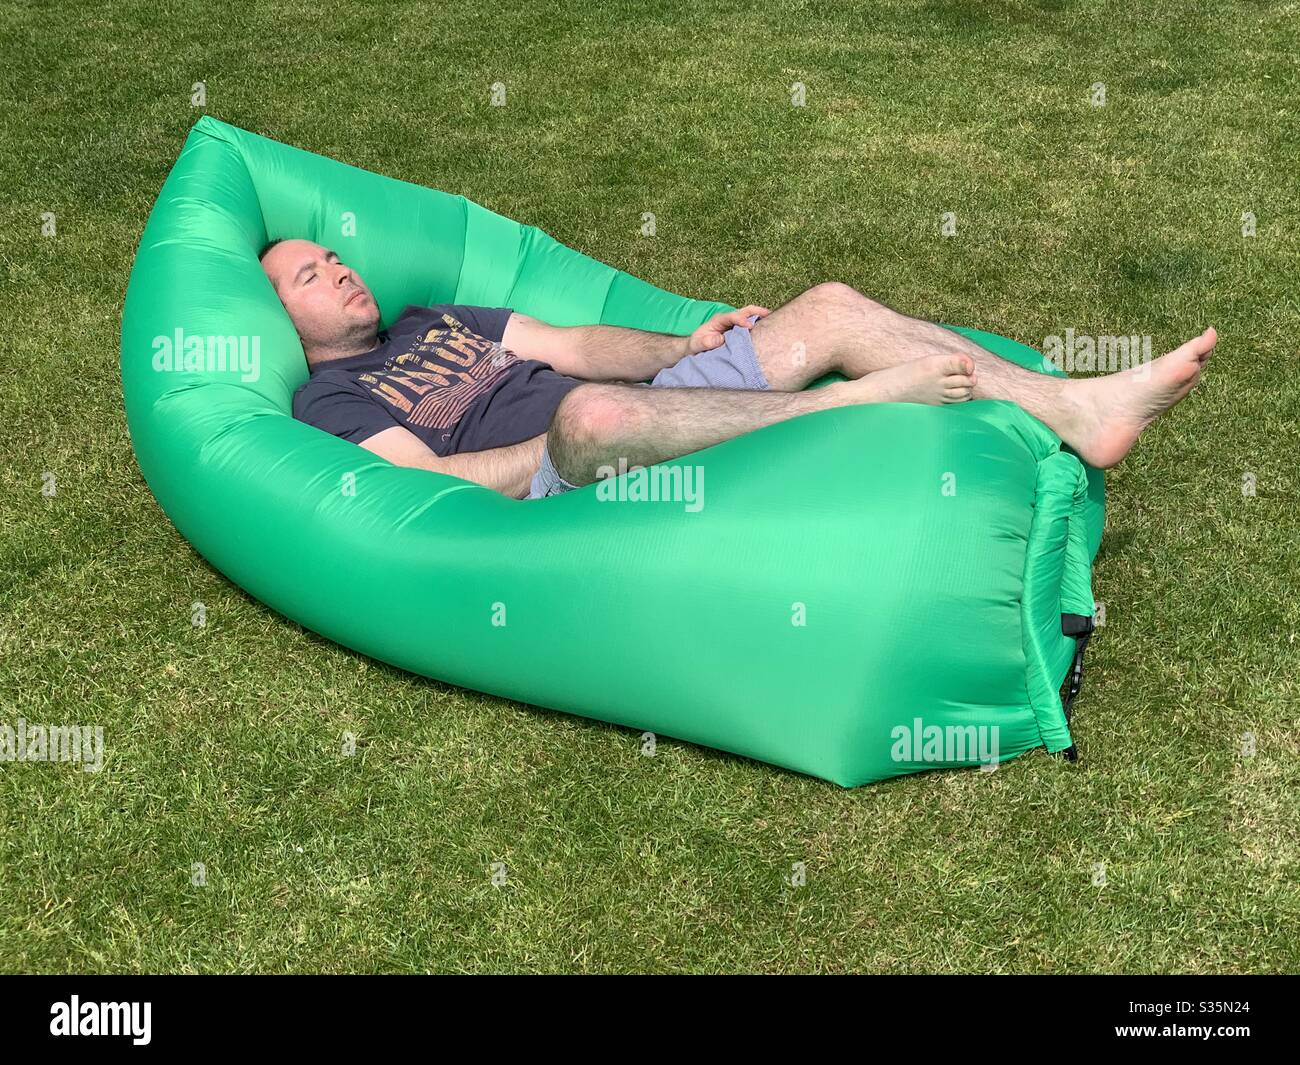 Man sleeps on a large green air bag in the garden. Stock Photo